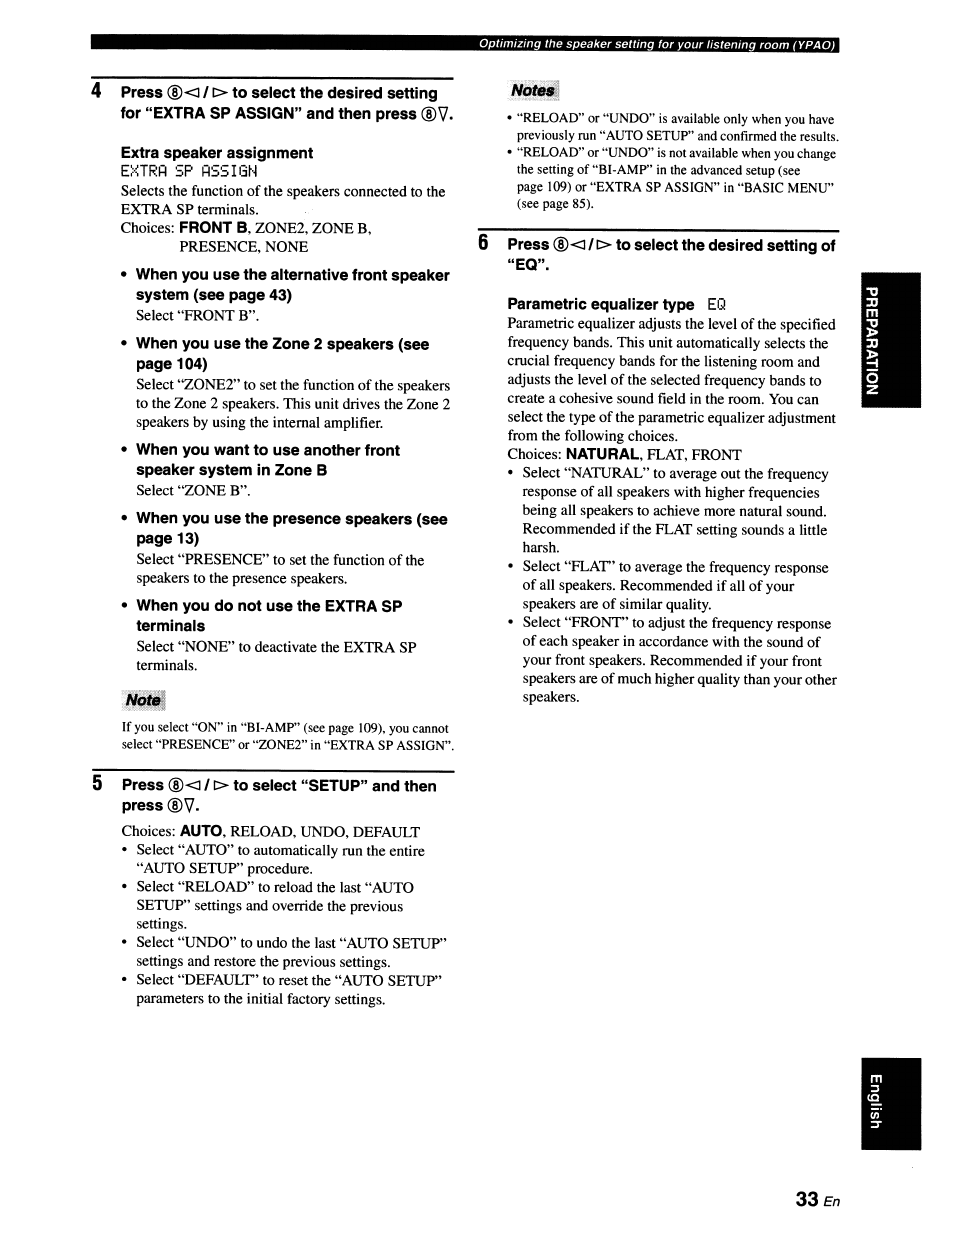 Extra sp assign | Yamaha RX-V663 User Manual | Page 37 / 151